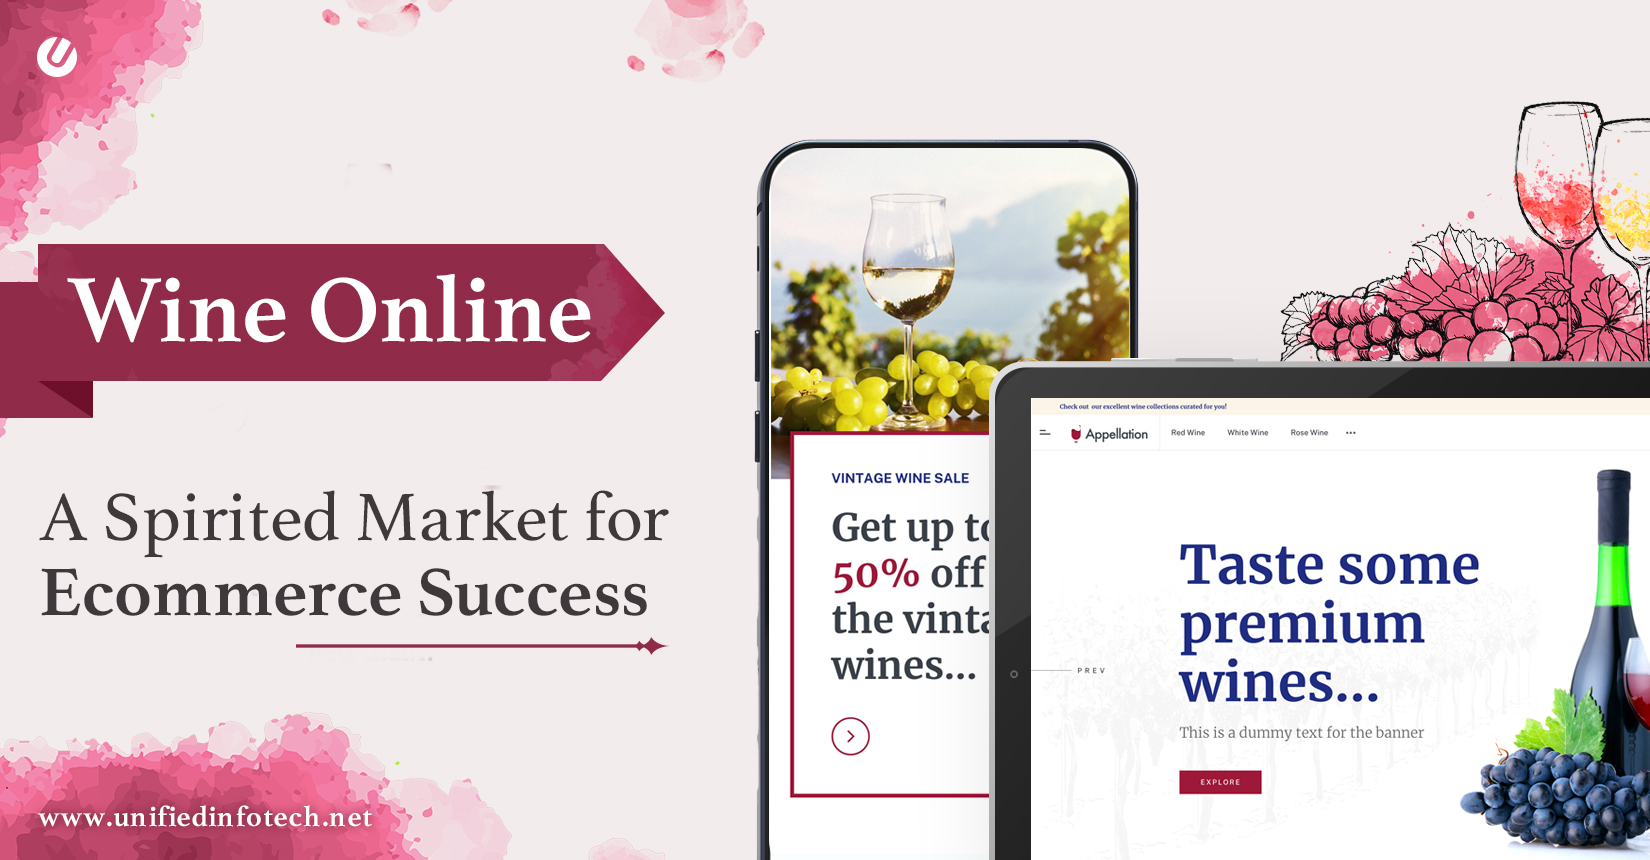 How We Are Transforming Wine Business to be Technology-driven